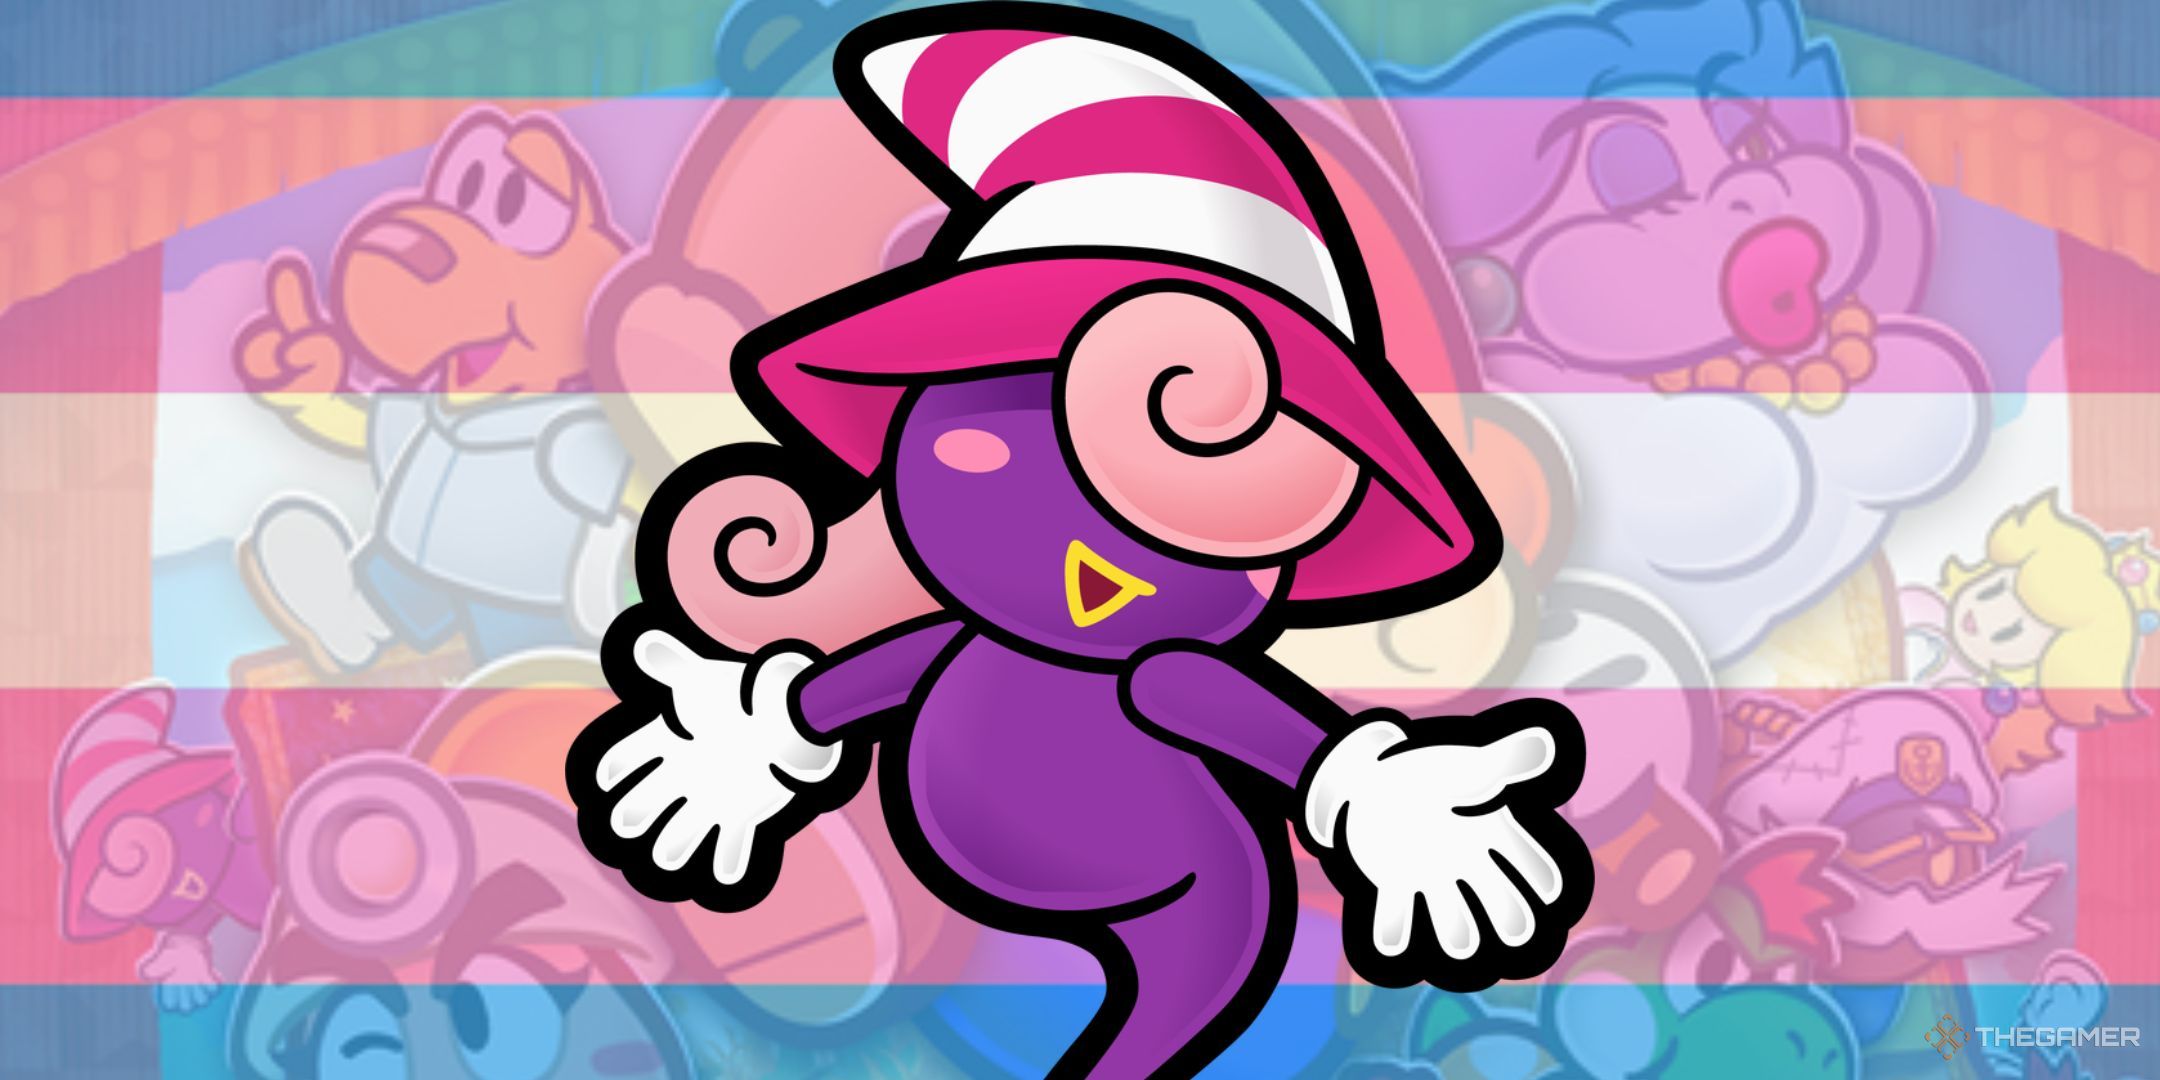 Vivian from Paper Mario. The backfround is the cover art for Paper Mario, draped in a trans pride flag